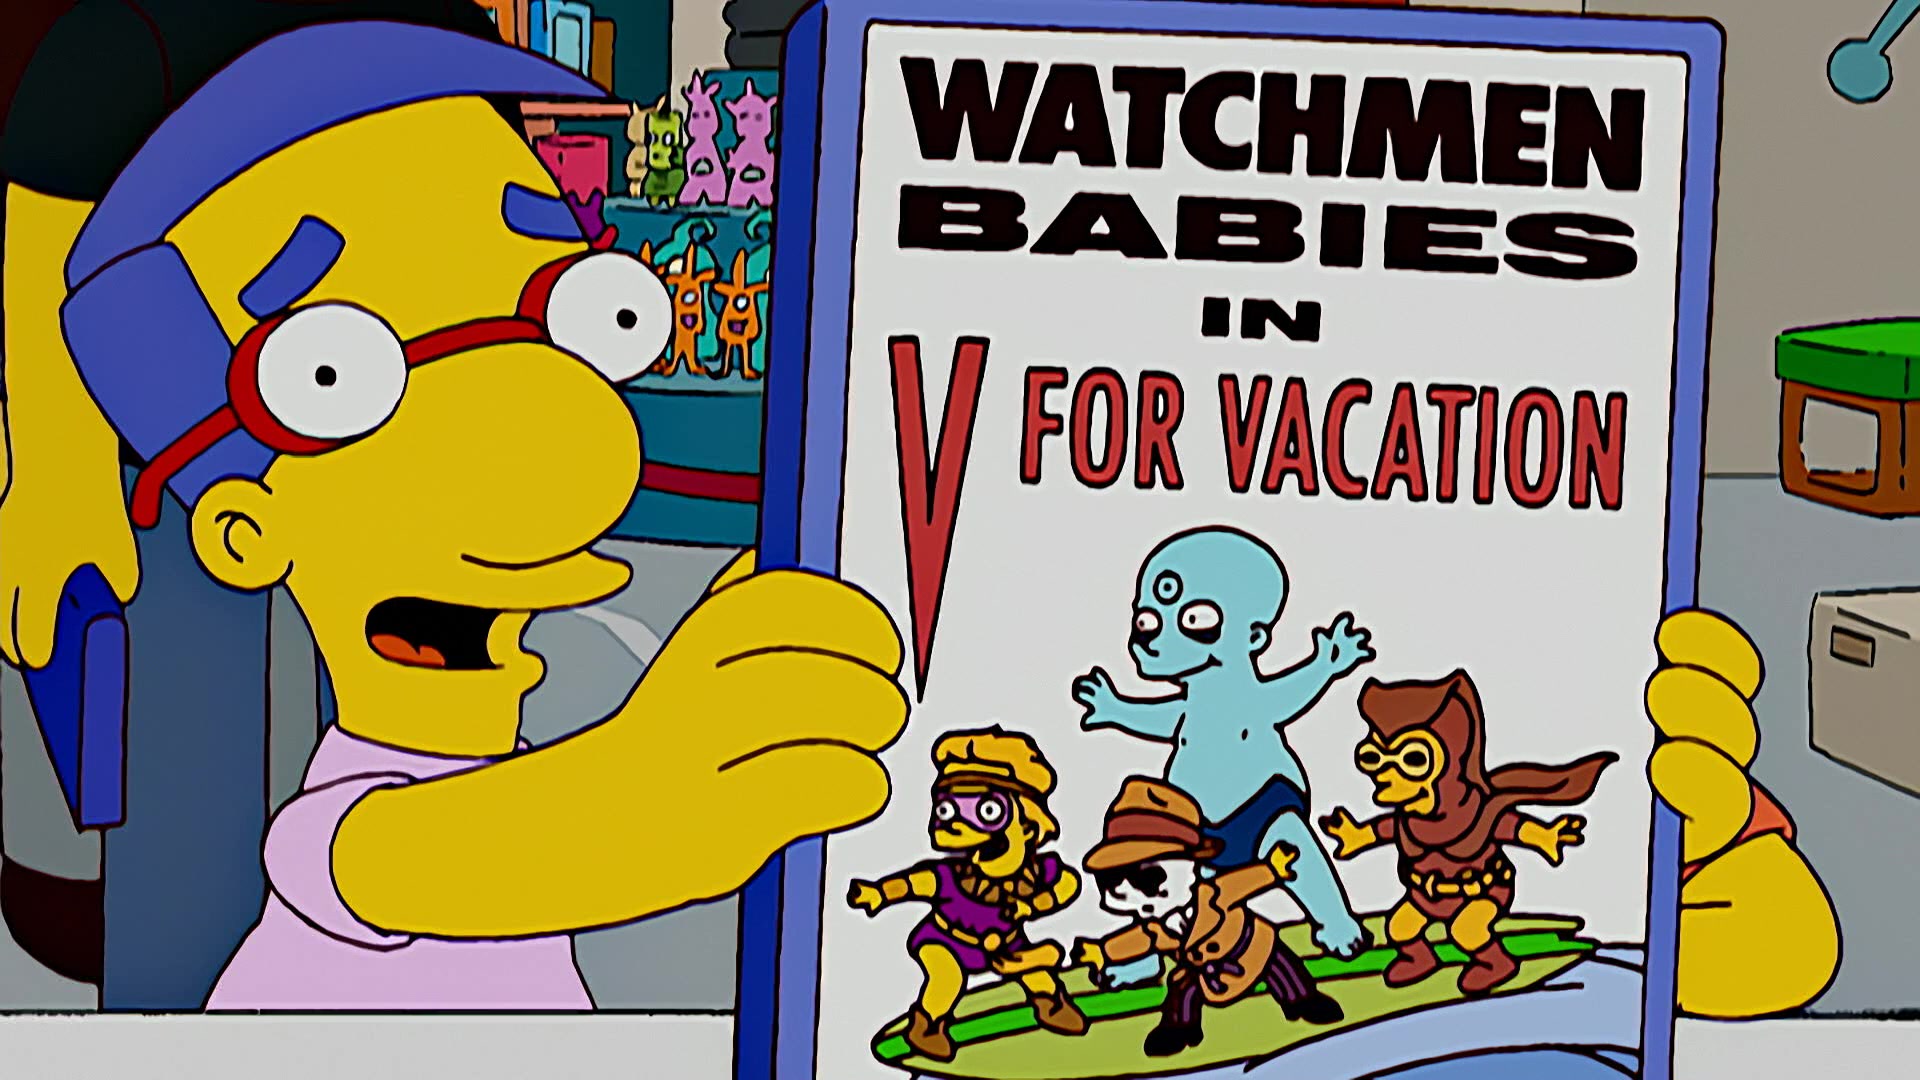 Milhouse (Pamela Hayden) asks Alan Moore (Himself) which of the Watchmen Babies is his favorite in The Simpsons Season 19 Episode 7 "Husbands and Knives" (2007), Fox Studios